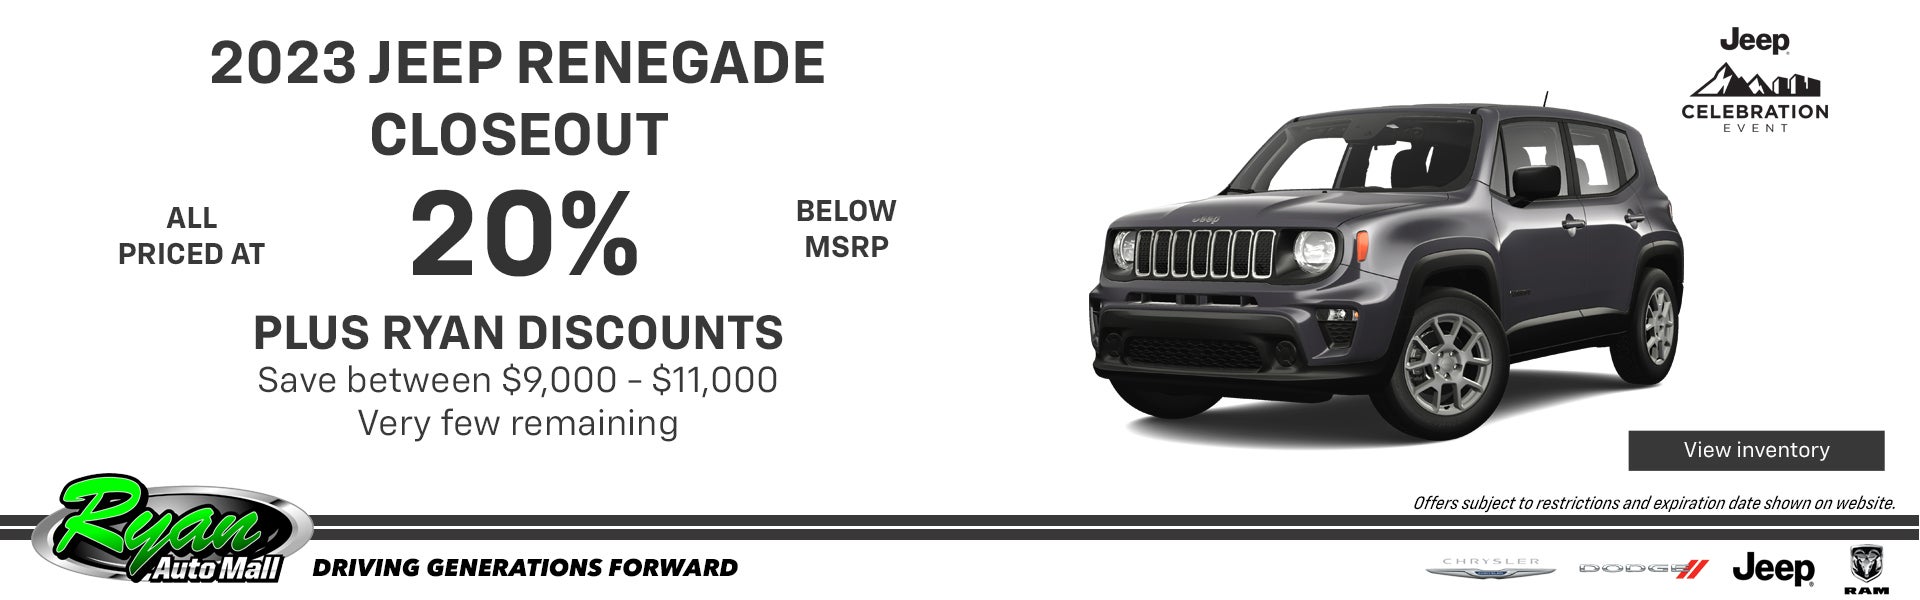 Jeep Renegade Closeout